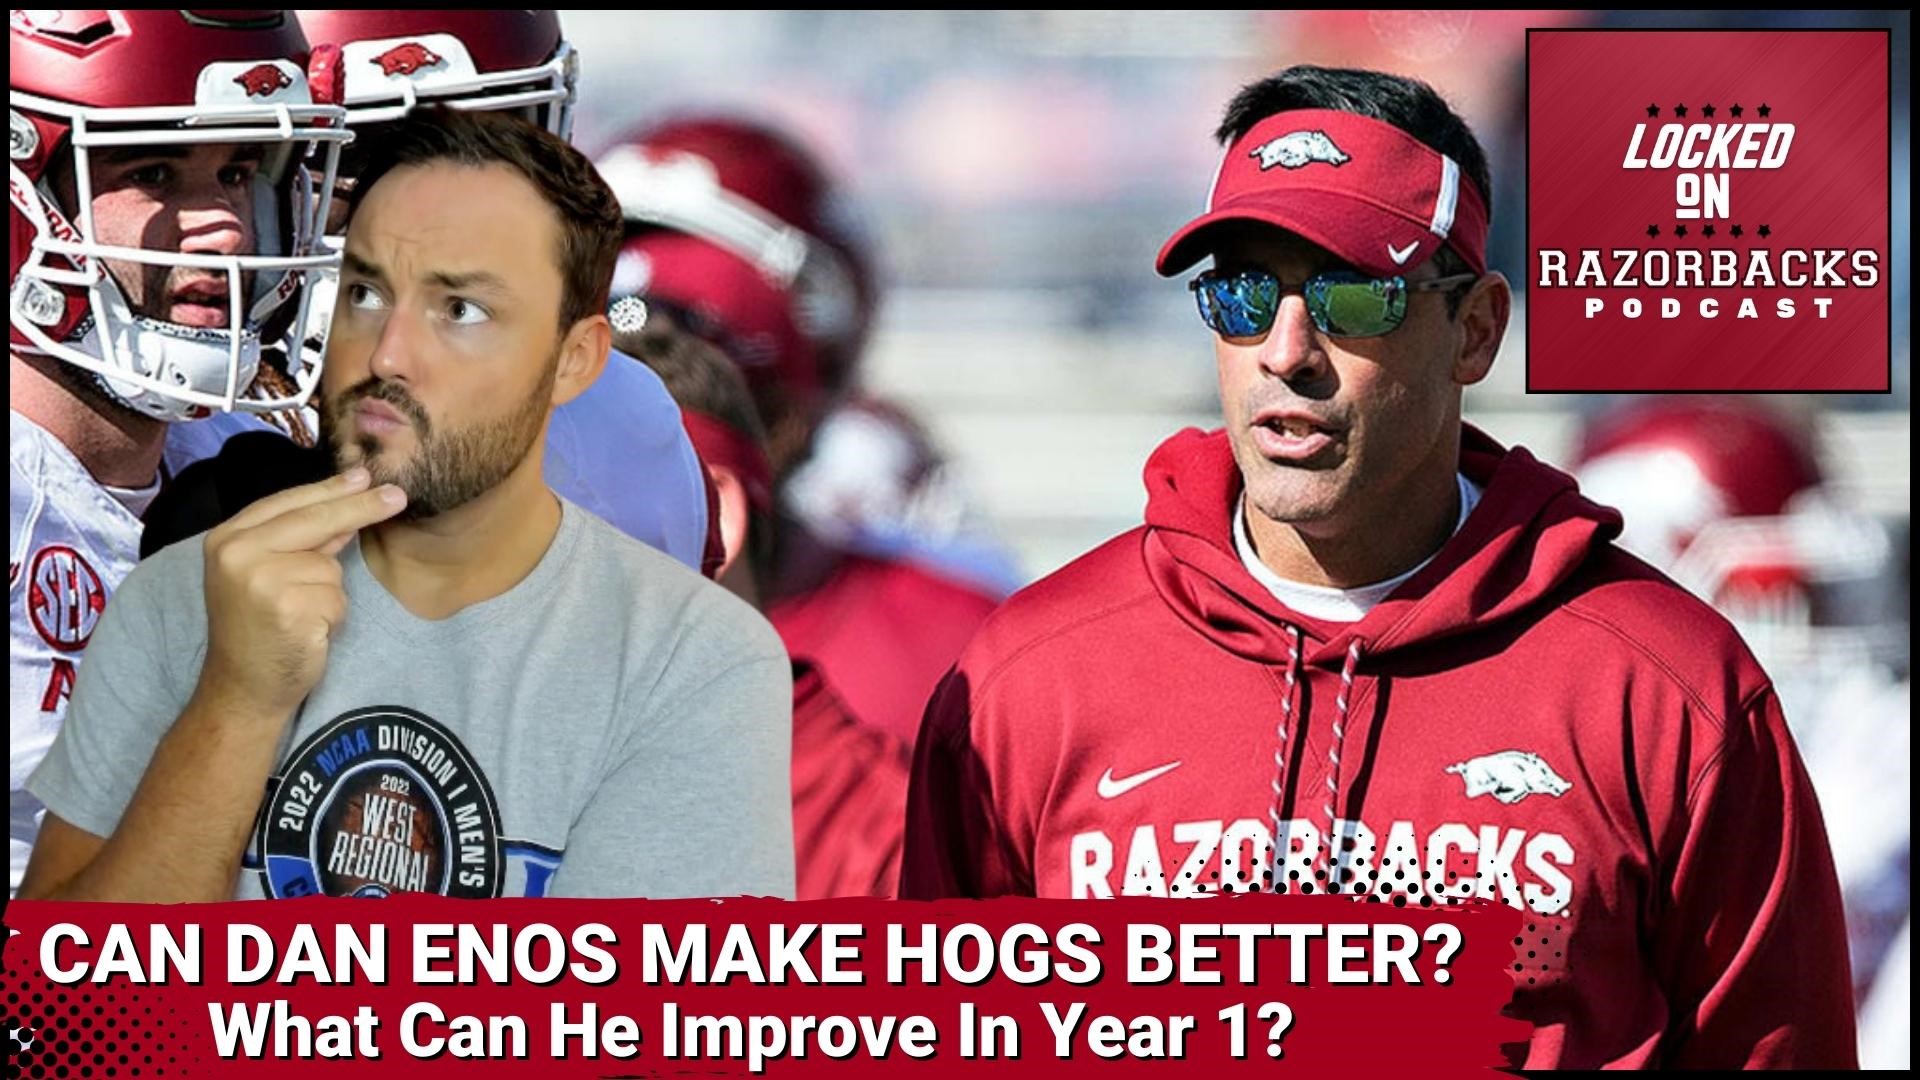 Now that Dan Enos is officially the offensive coordinator for the Razorback Football team, what can Hog fans expect from him in his first year with KJ Jefferson?